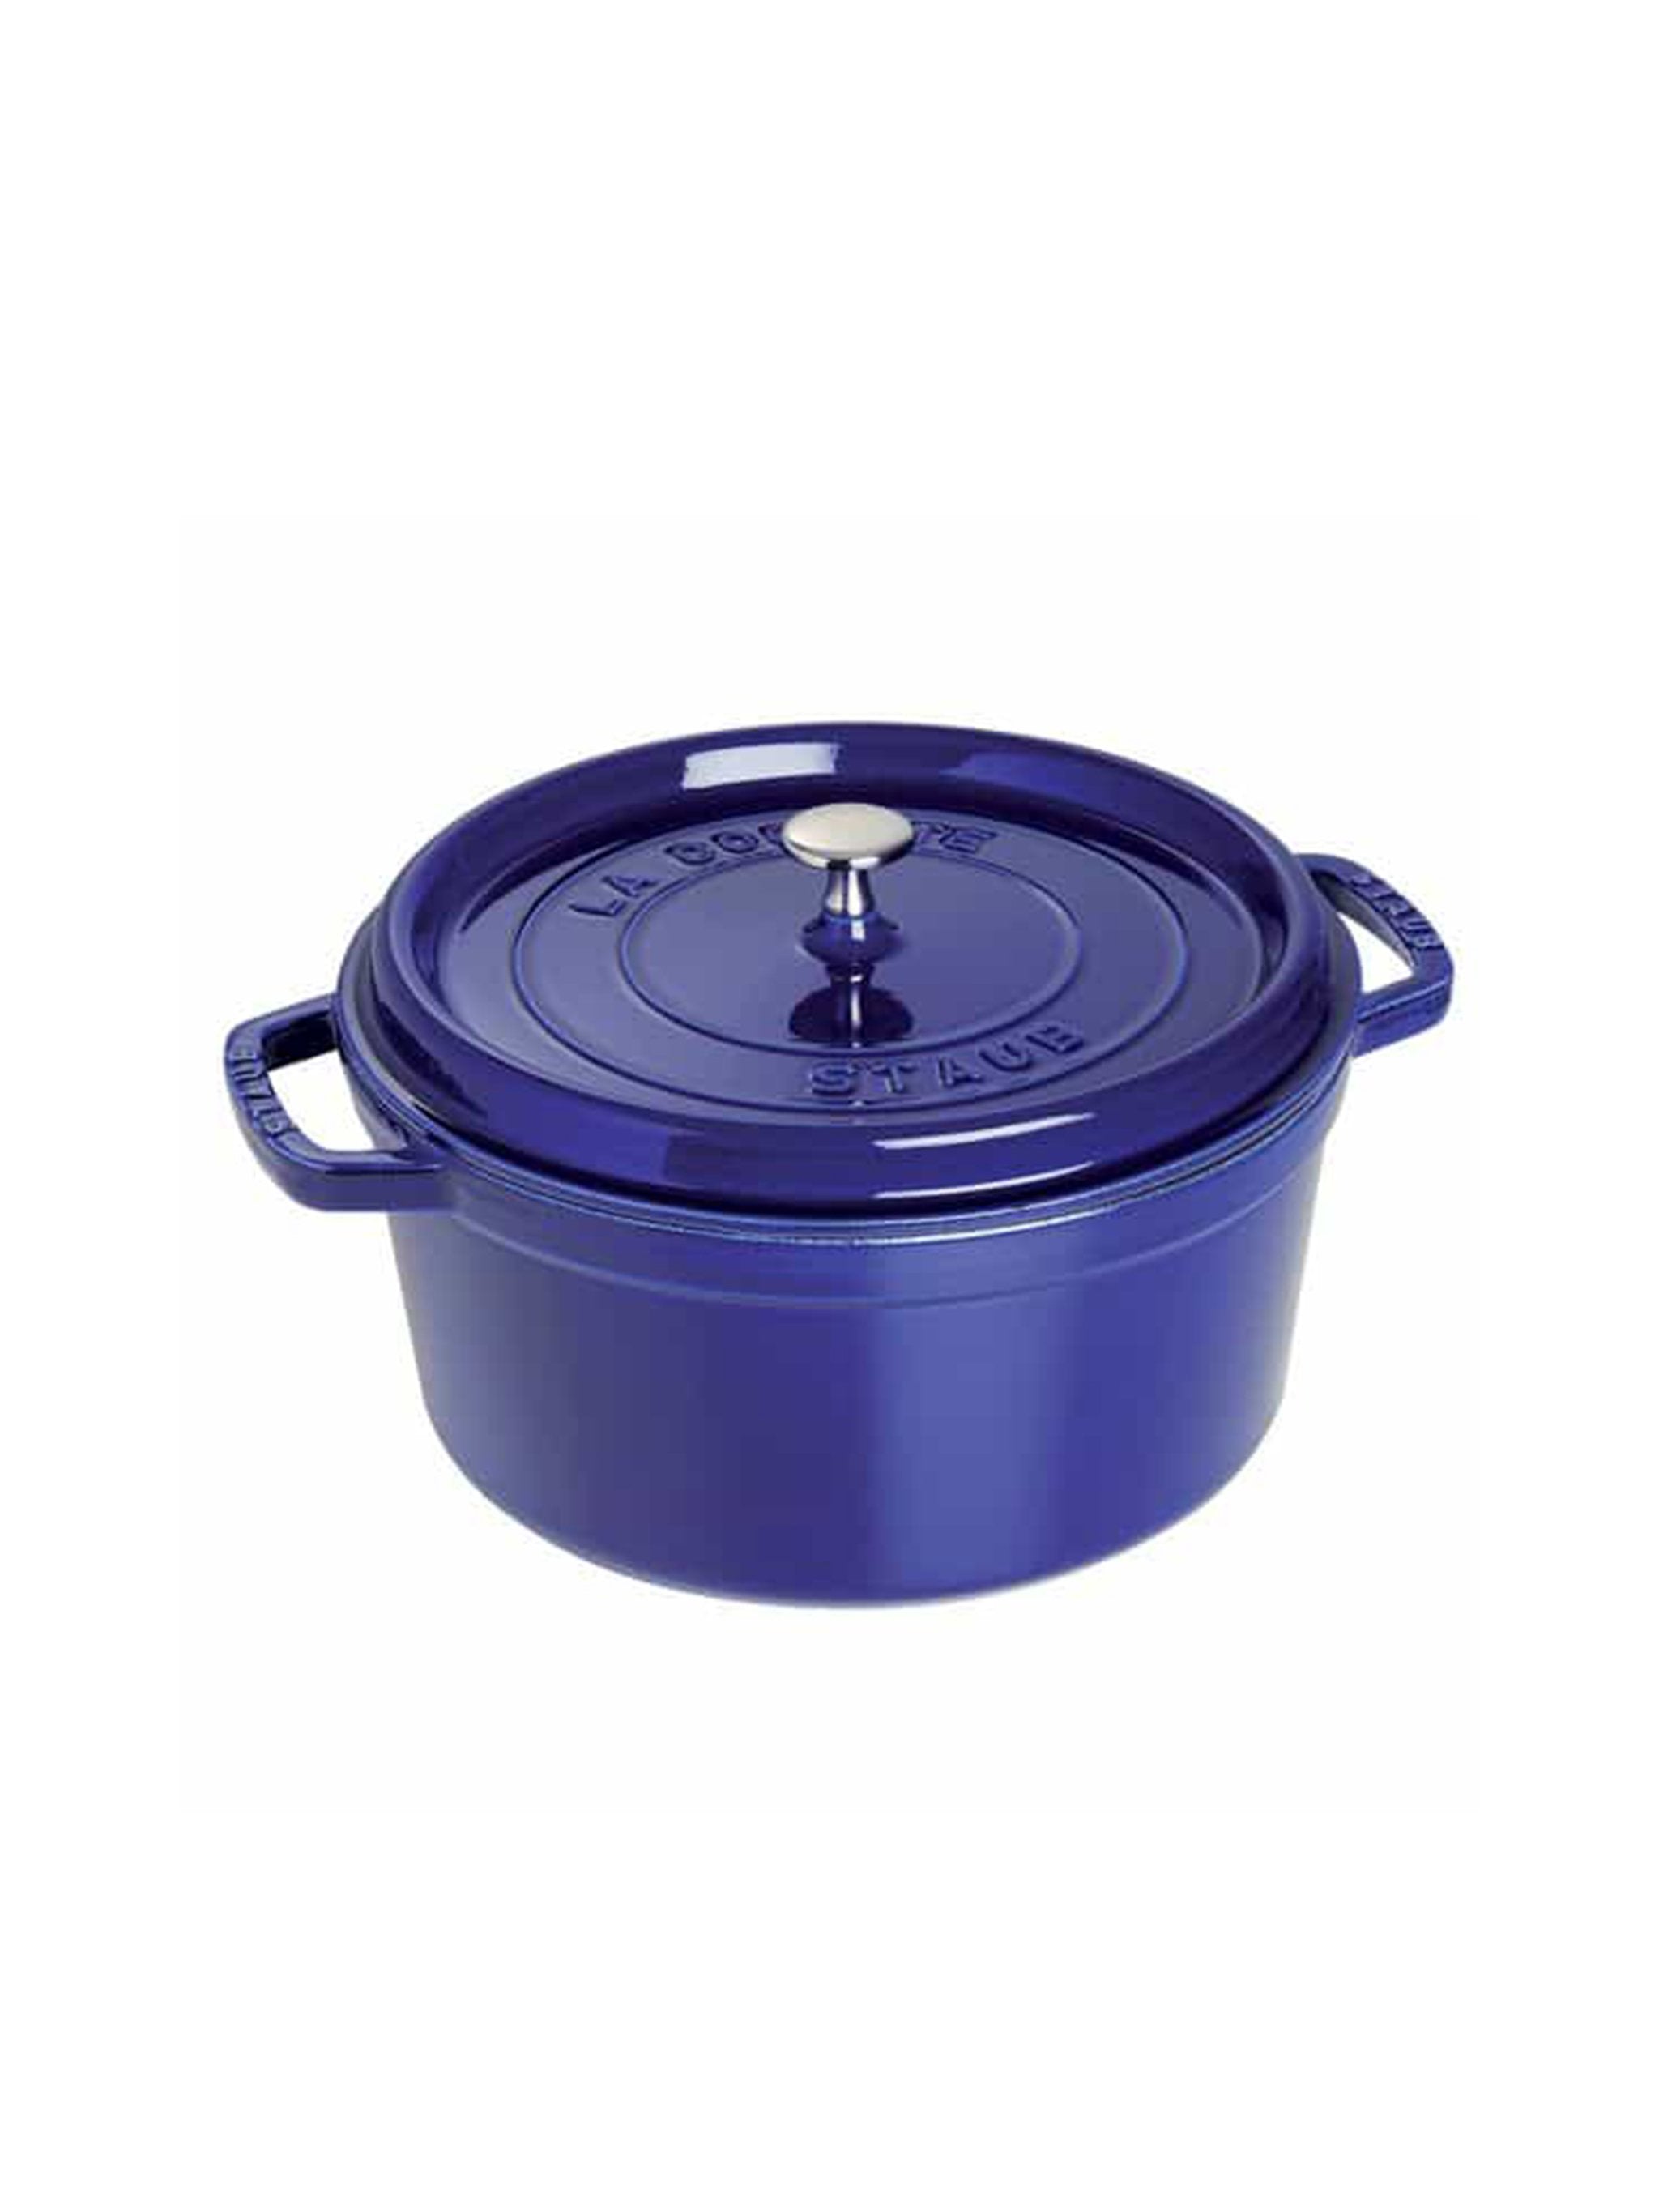 Staub Dutch Oven - 7-qt Cast Iron Cocotte - Sapphire Blue – Cutlery and More